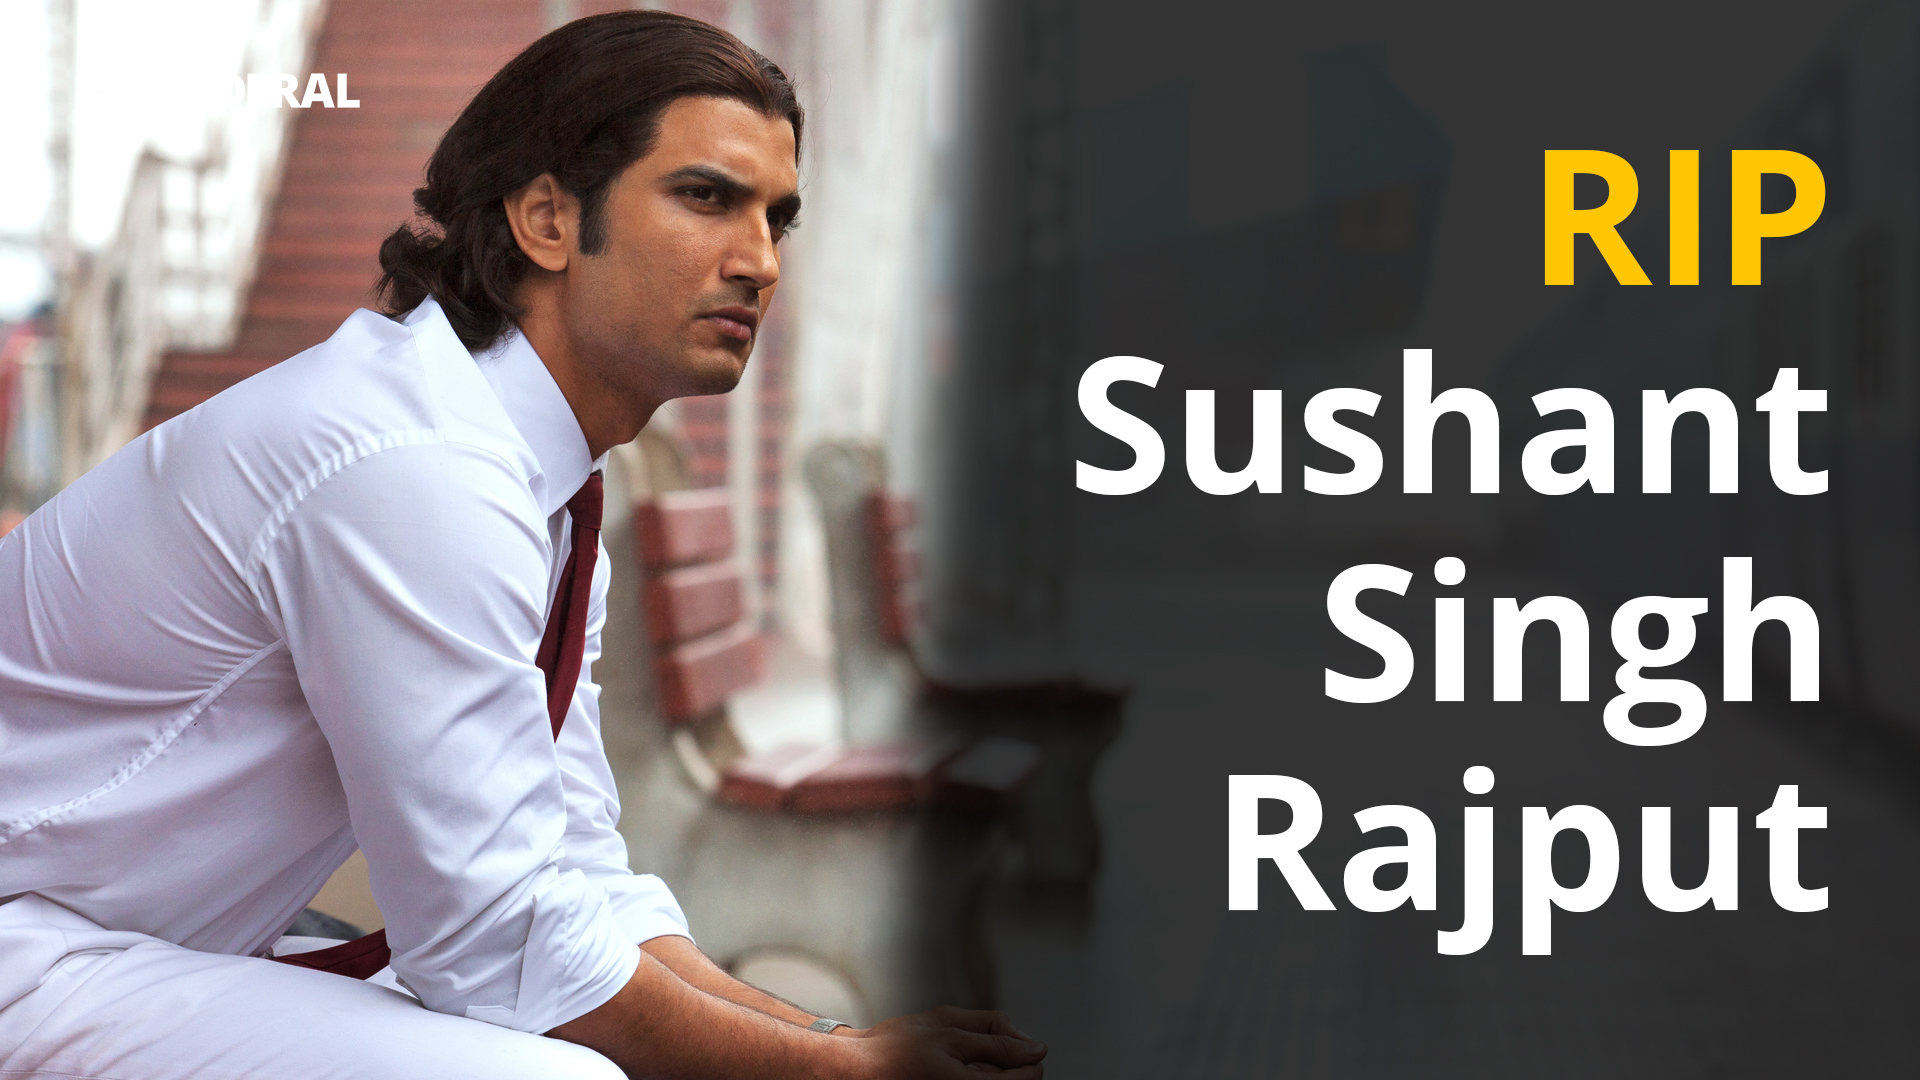 Sushant Singh Rajput: A bright young star gone too soon